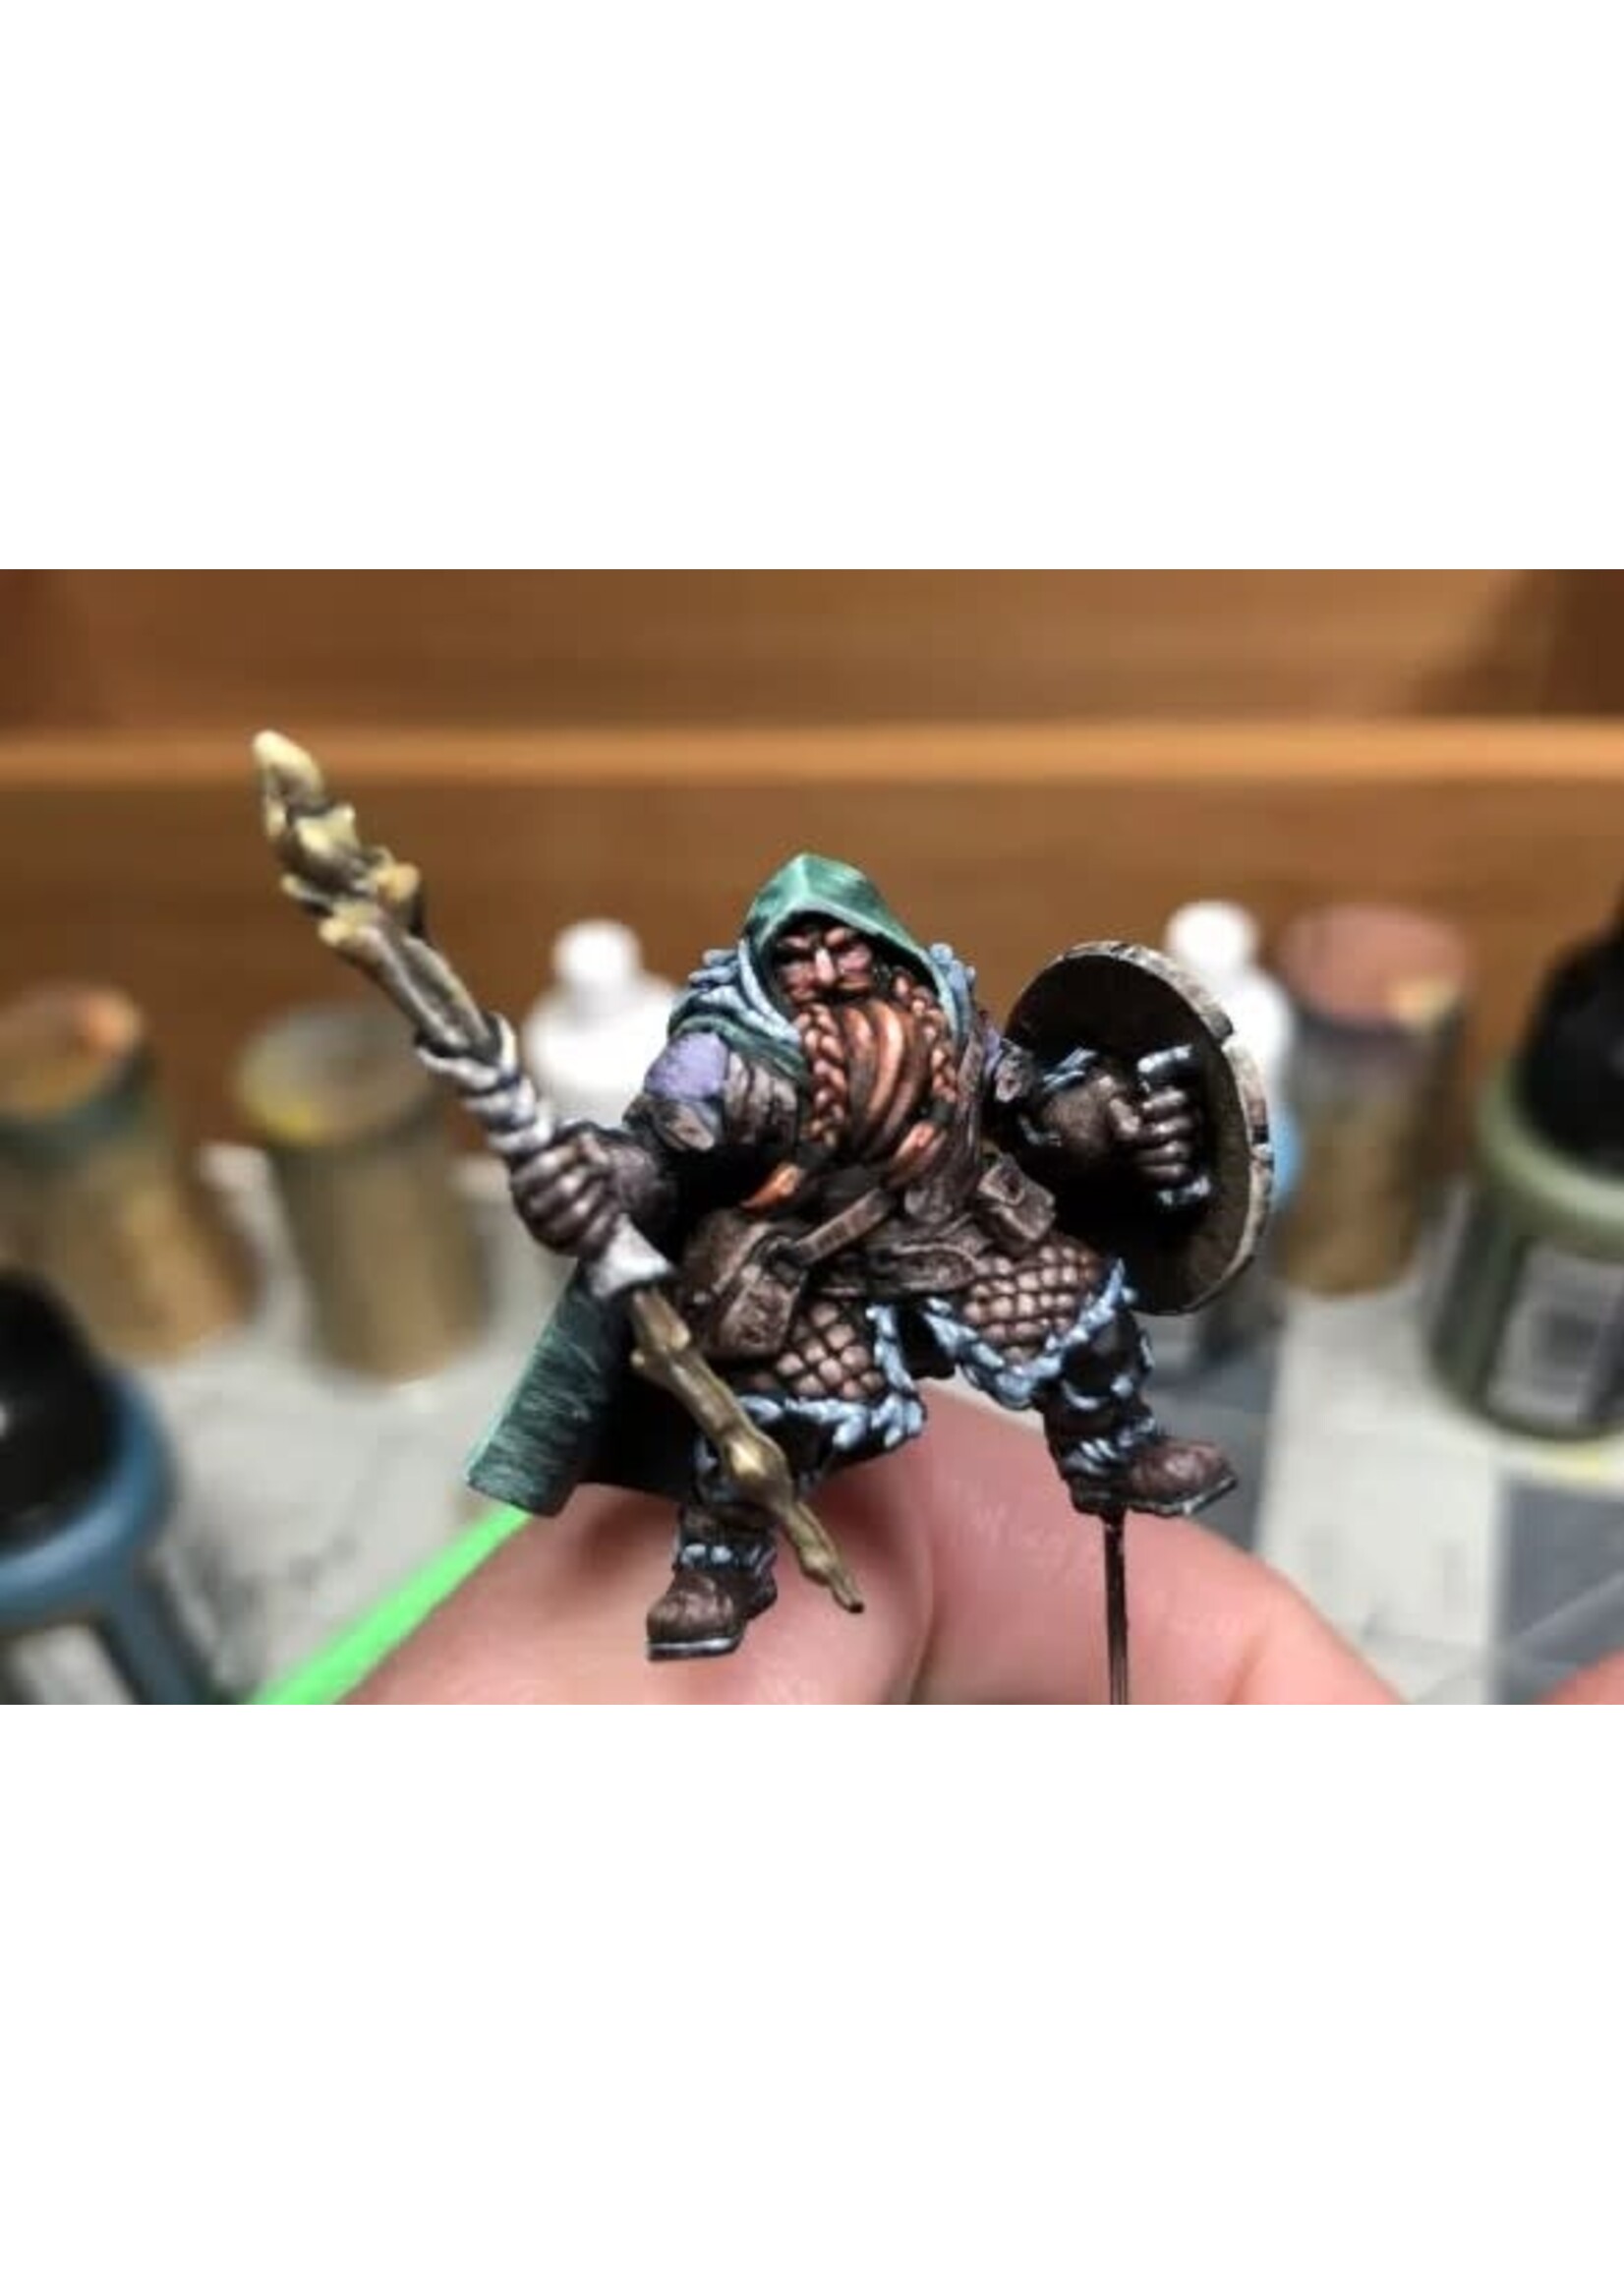 AoS Painting Contest